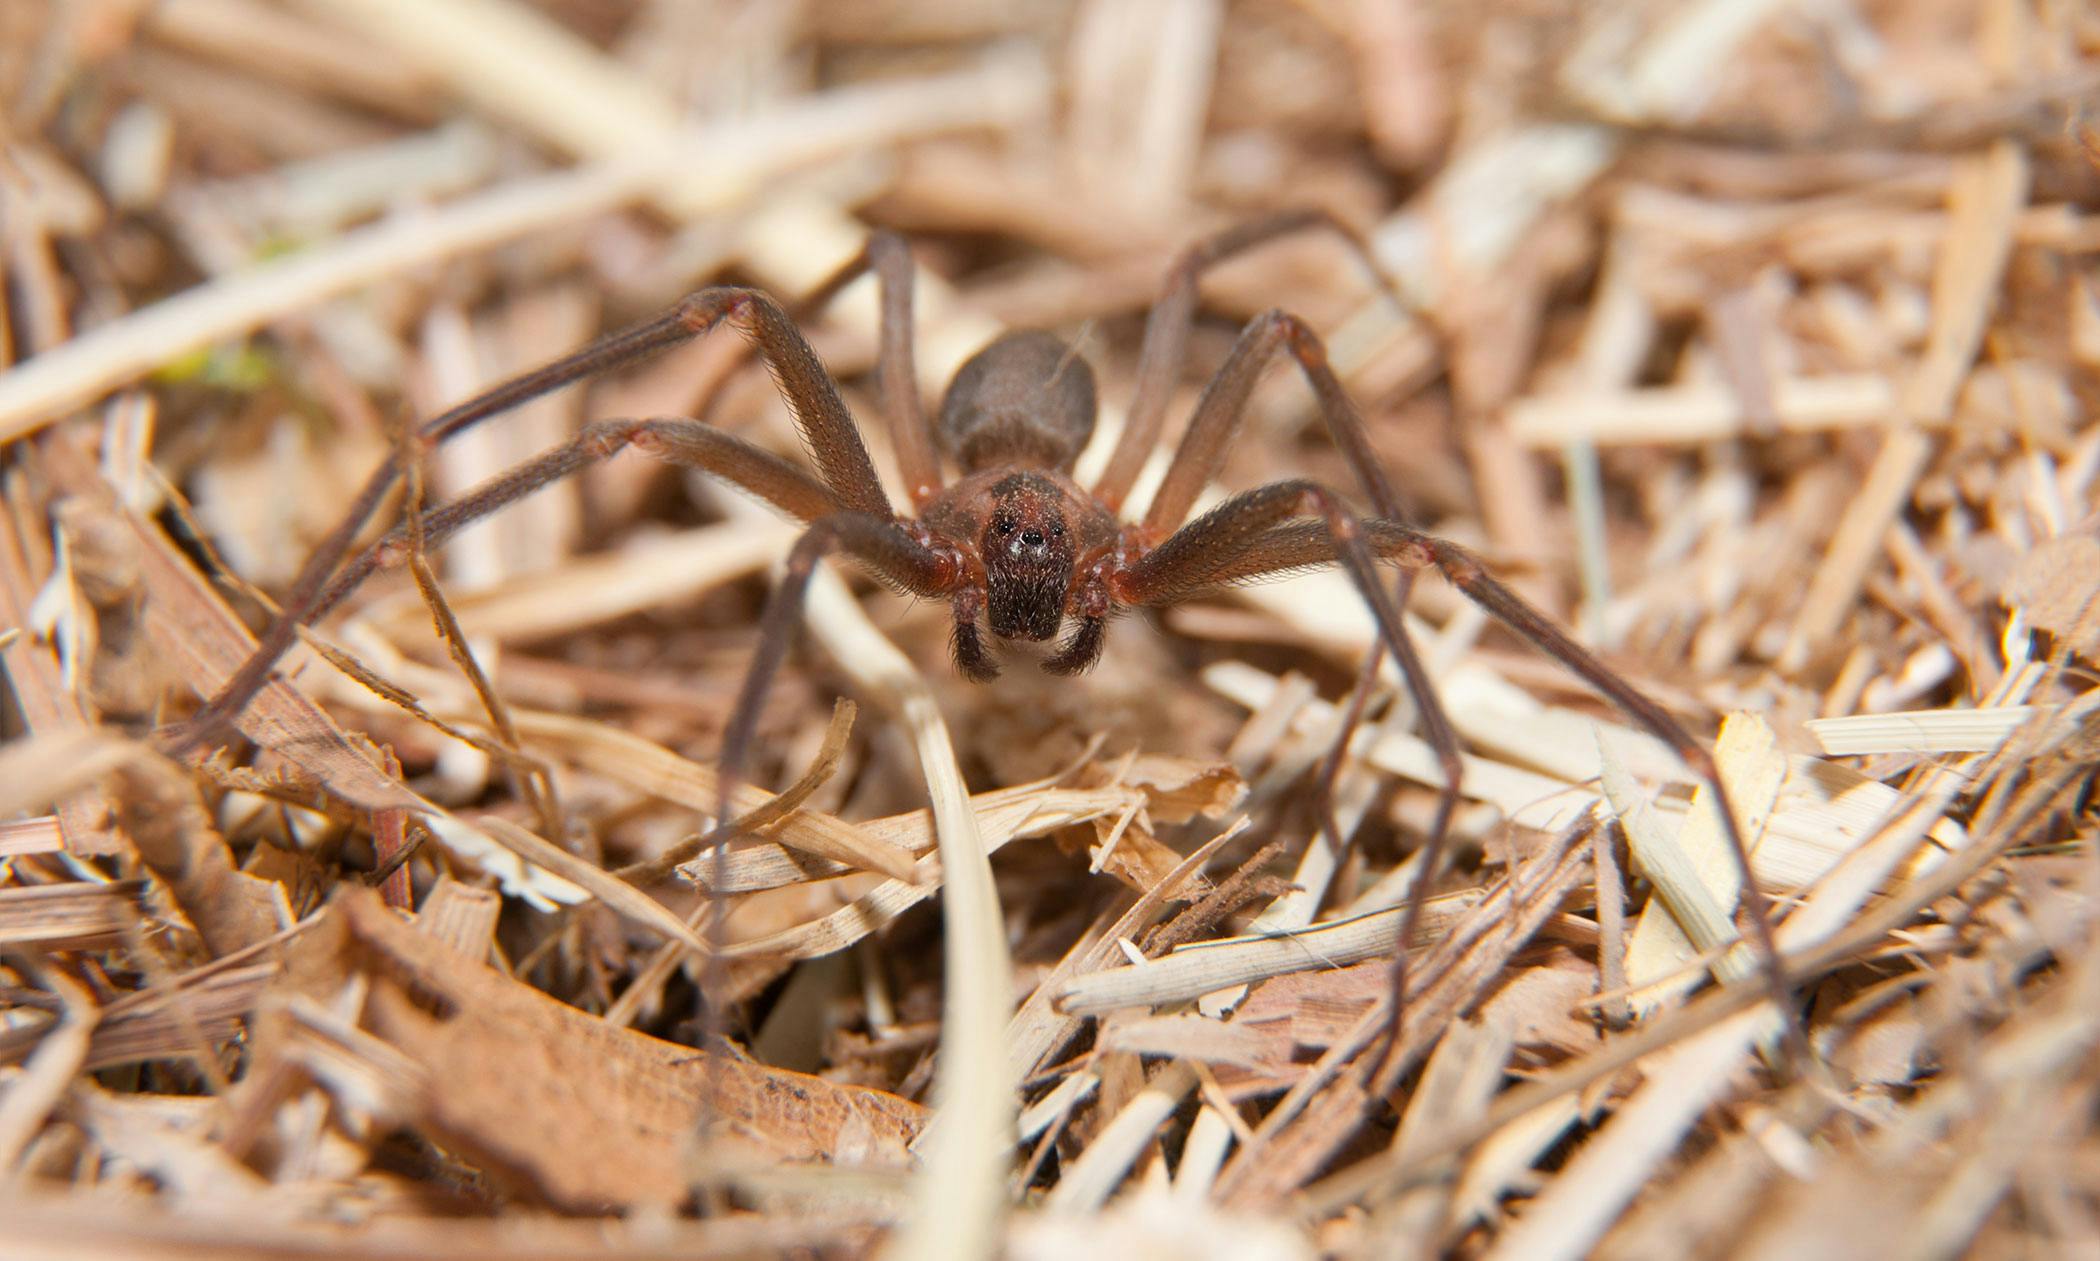 What are the stages of a Brown Recluse spider bite? - Quora